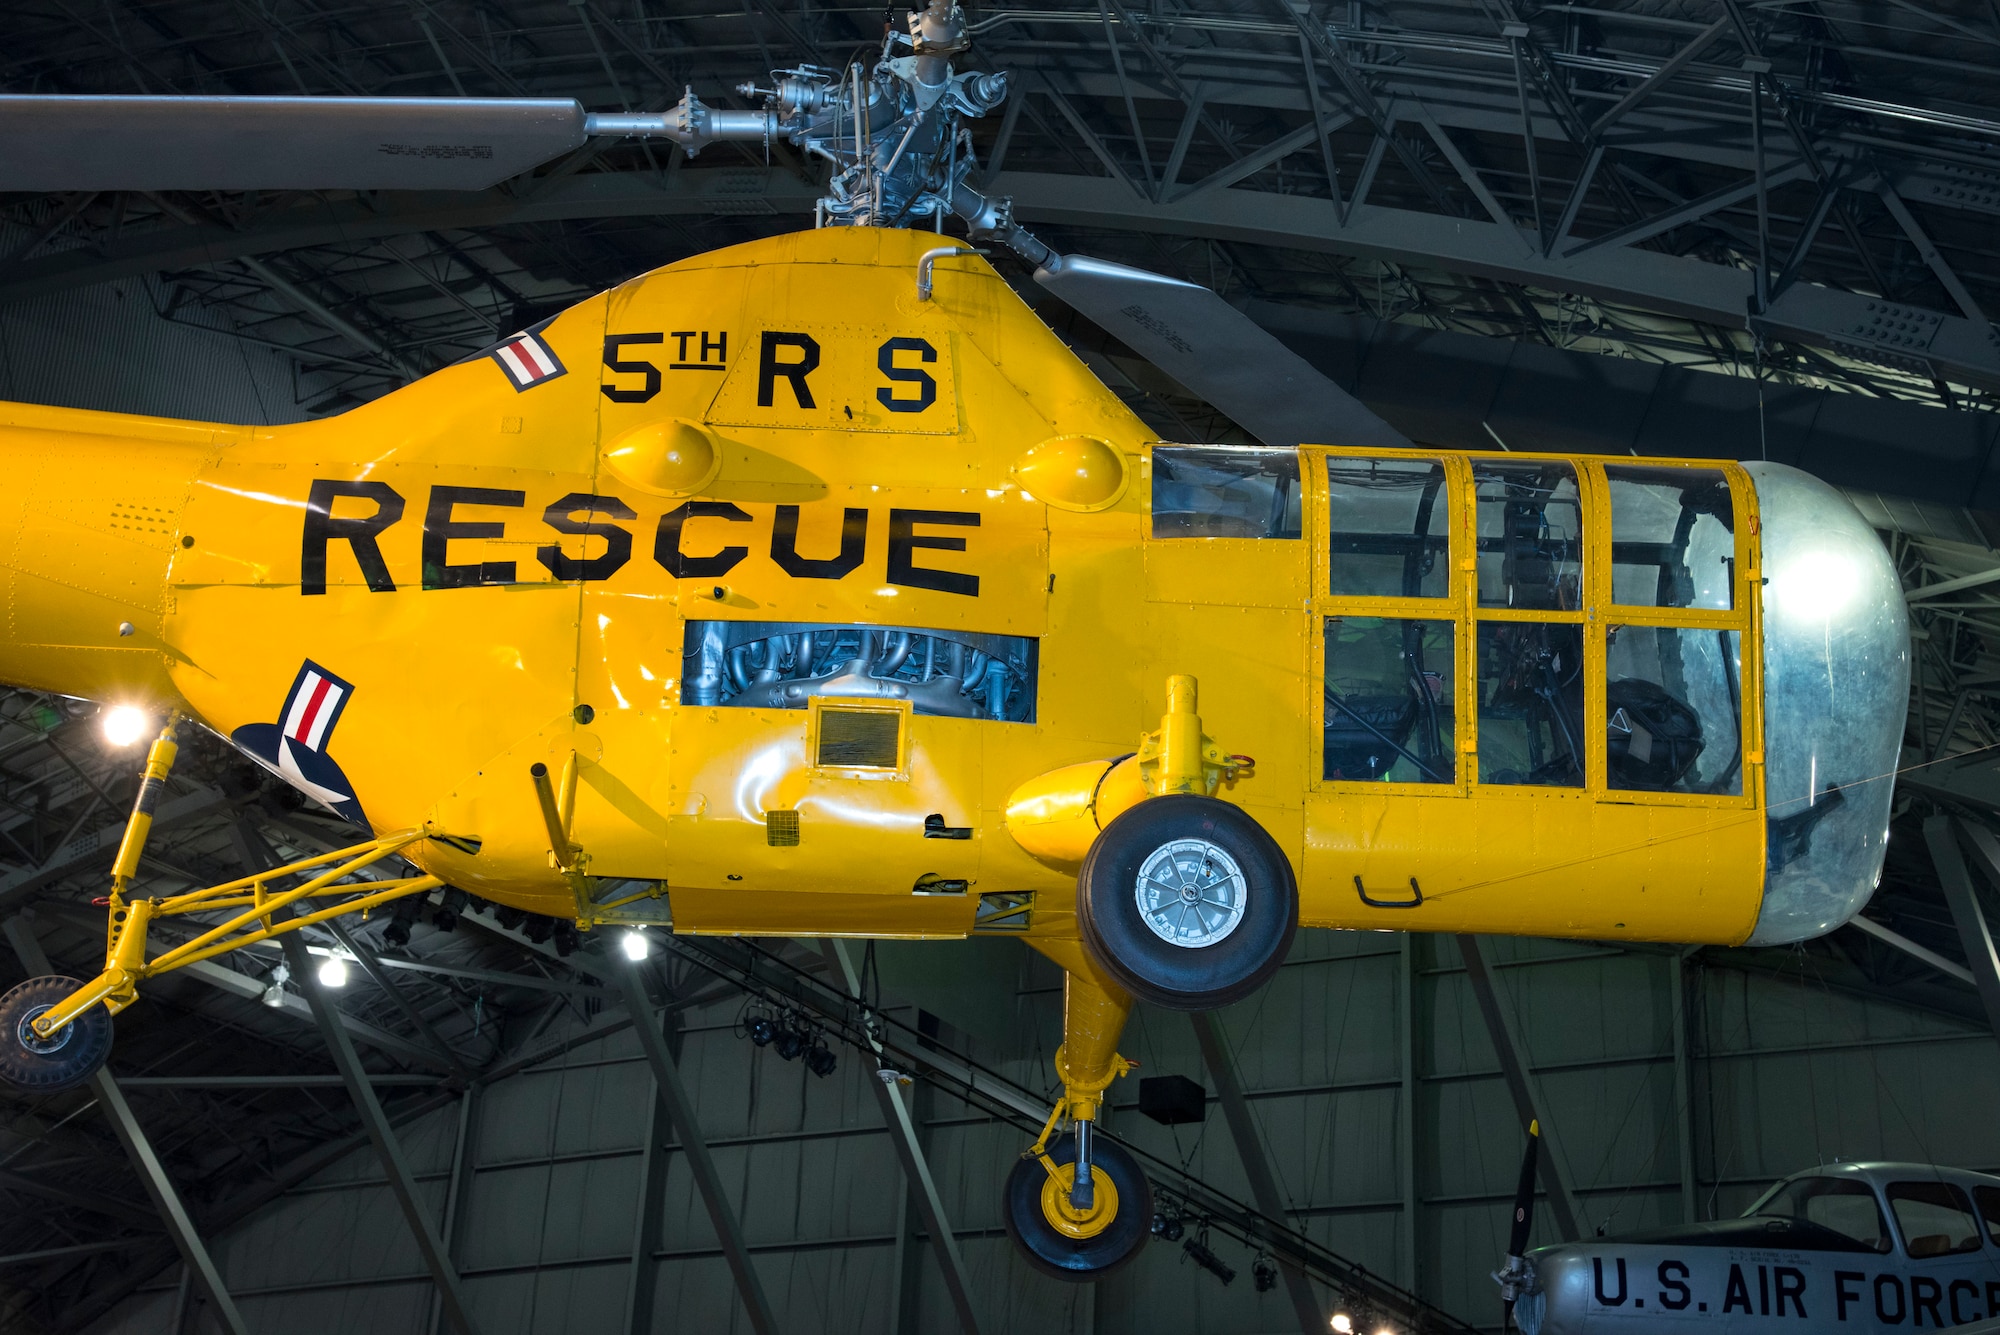 Sikorsky YH-5A on display in the Korean War Gallery at the National Museum of the United States Air Force. (U.S. Air Force photo by Ken LaRock)